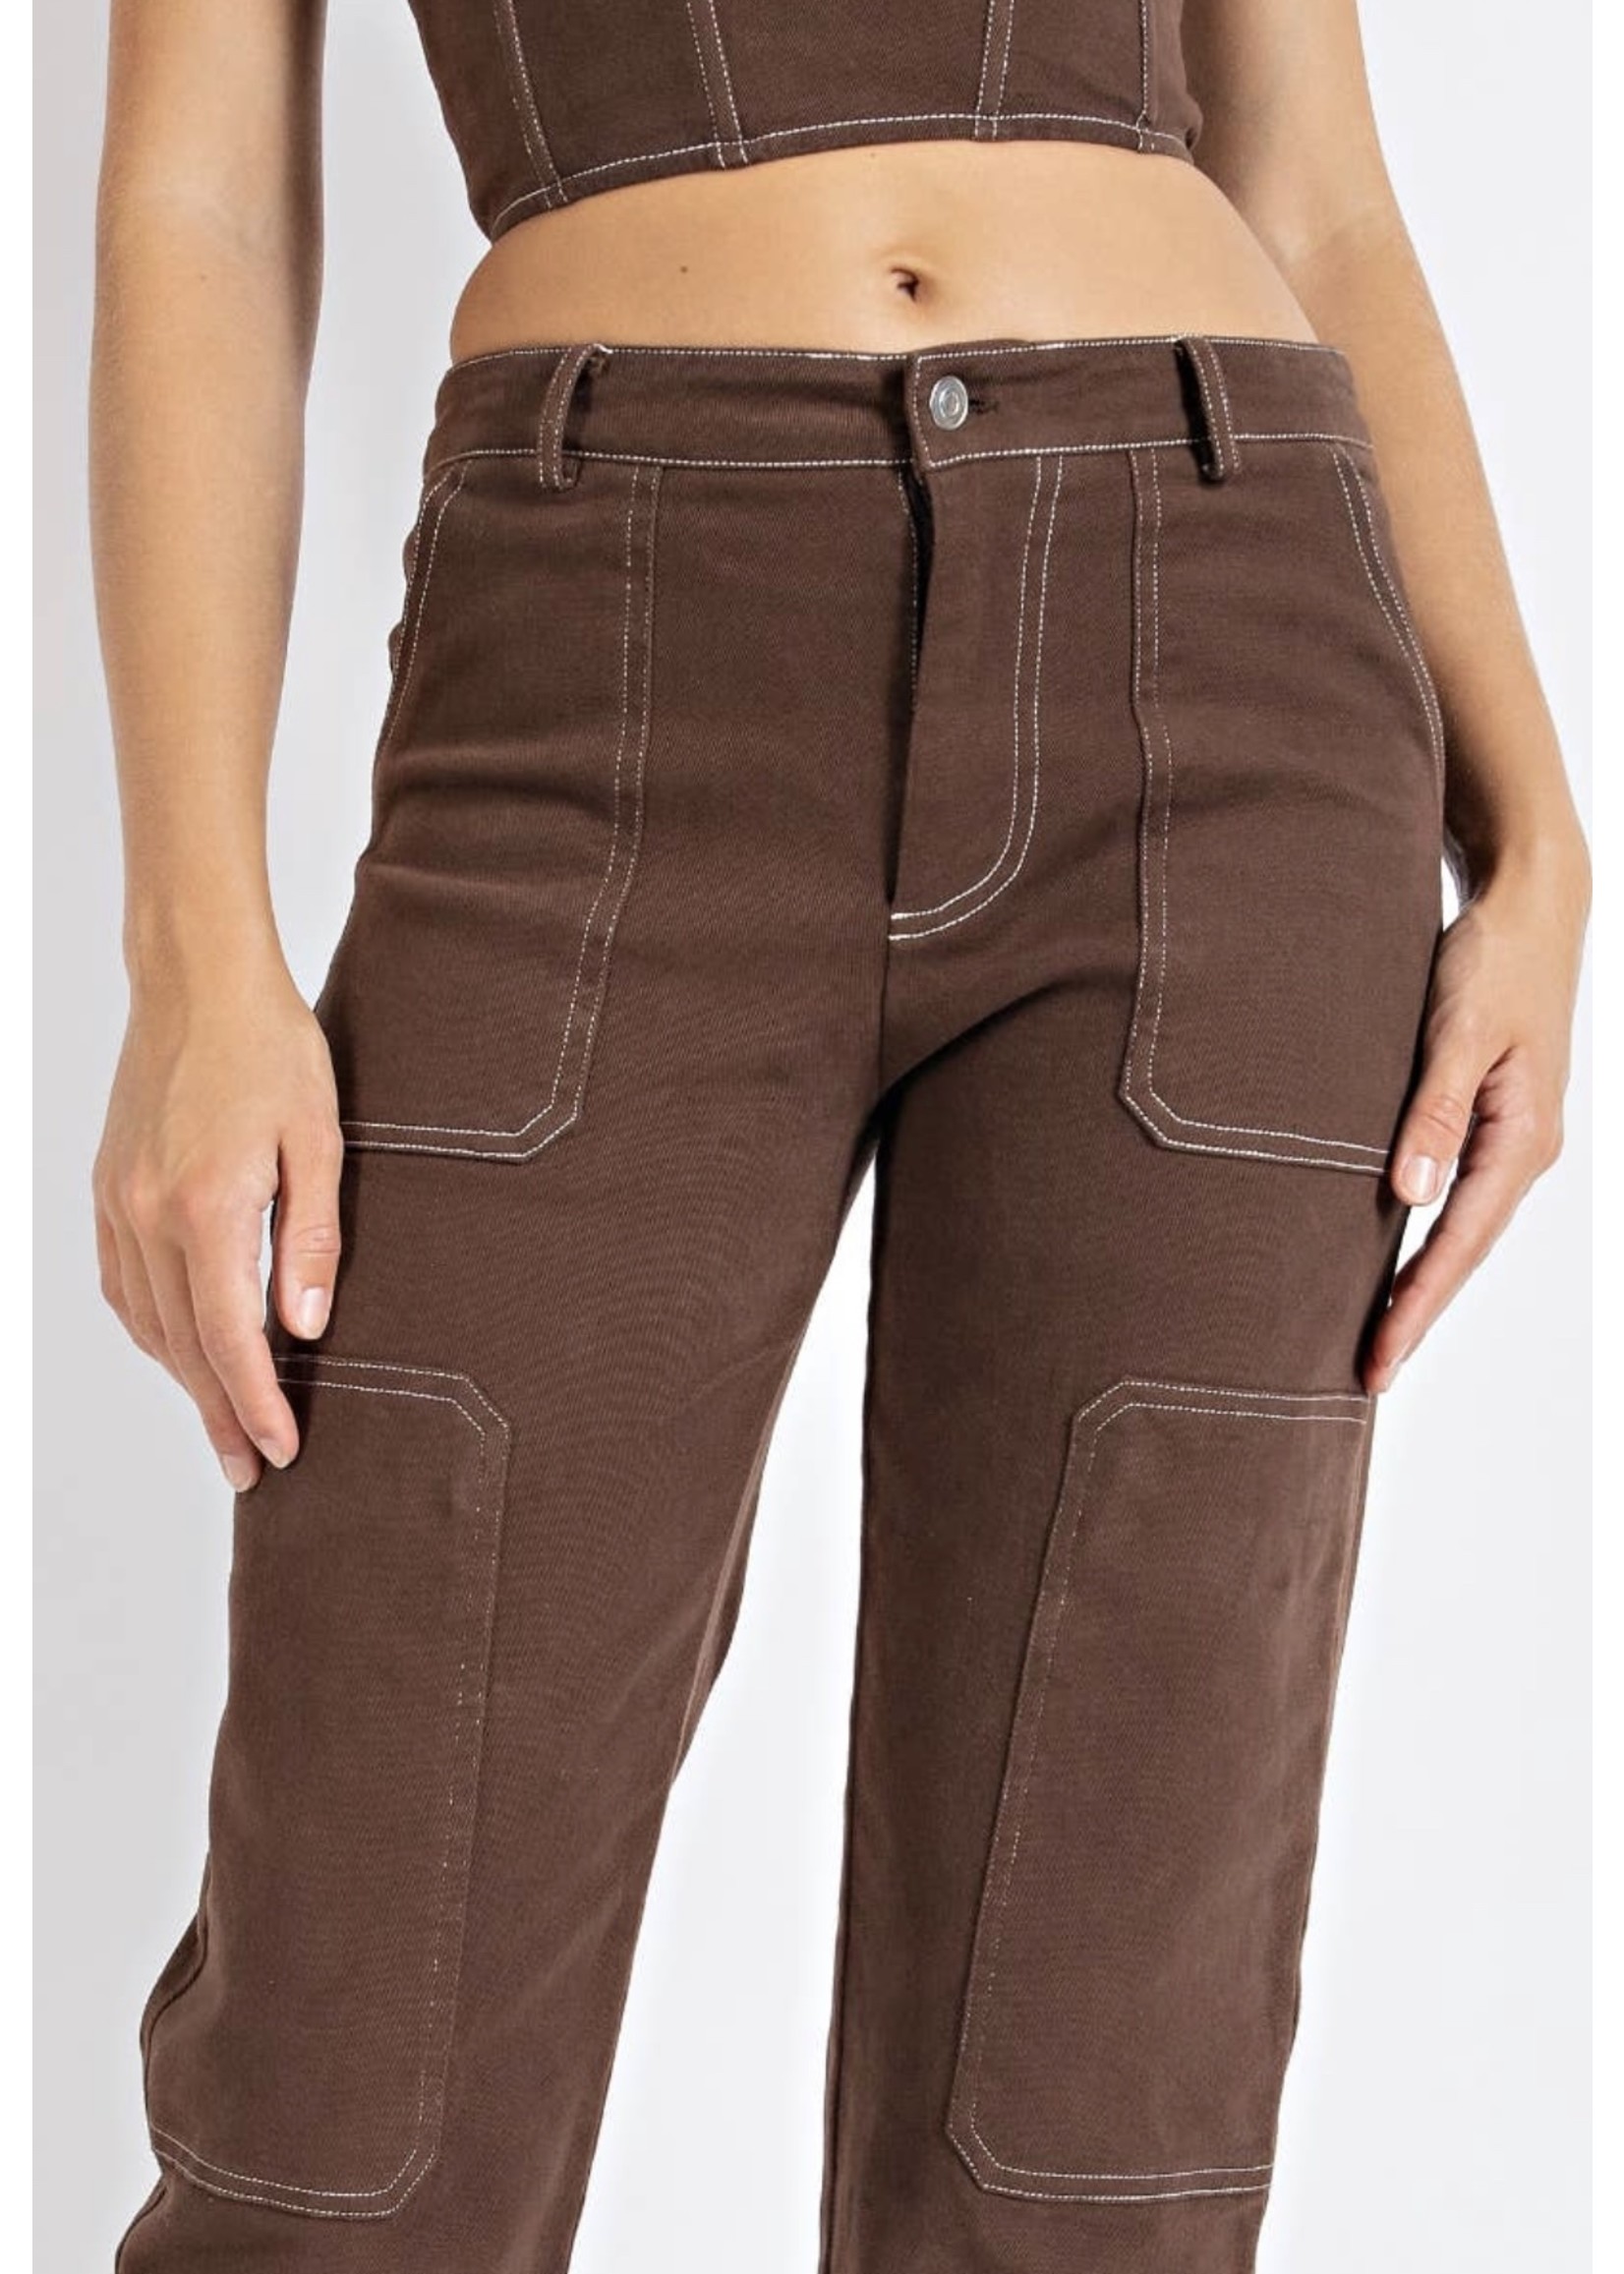 Brown Stitched Pants